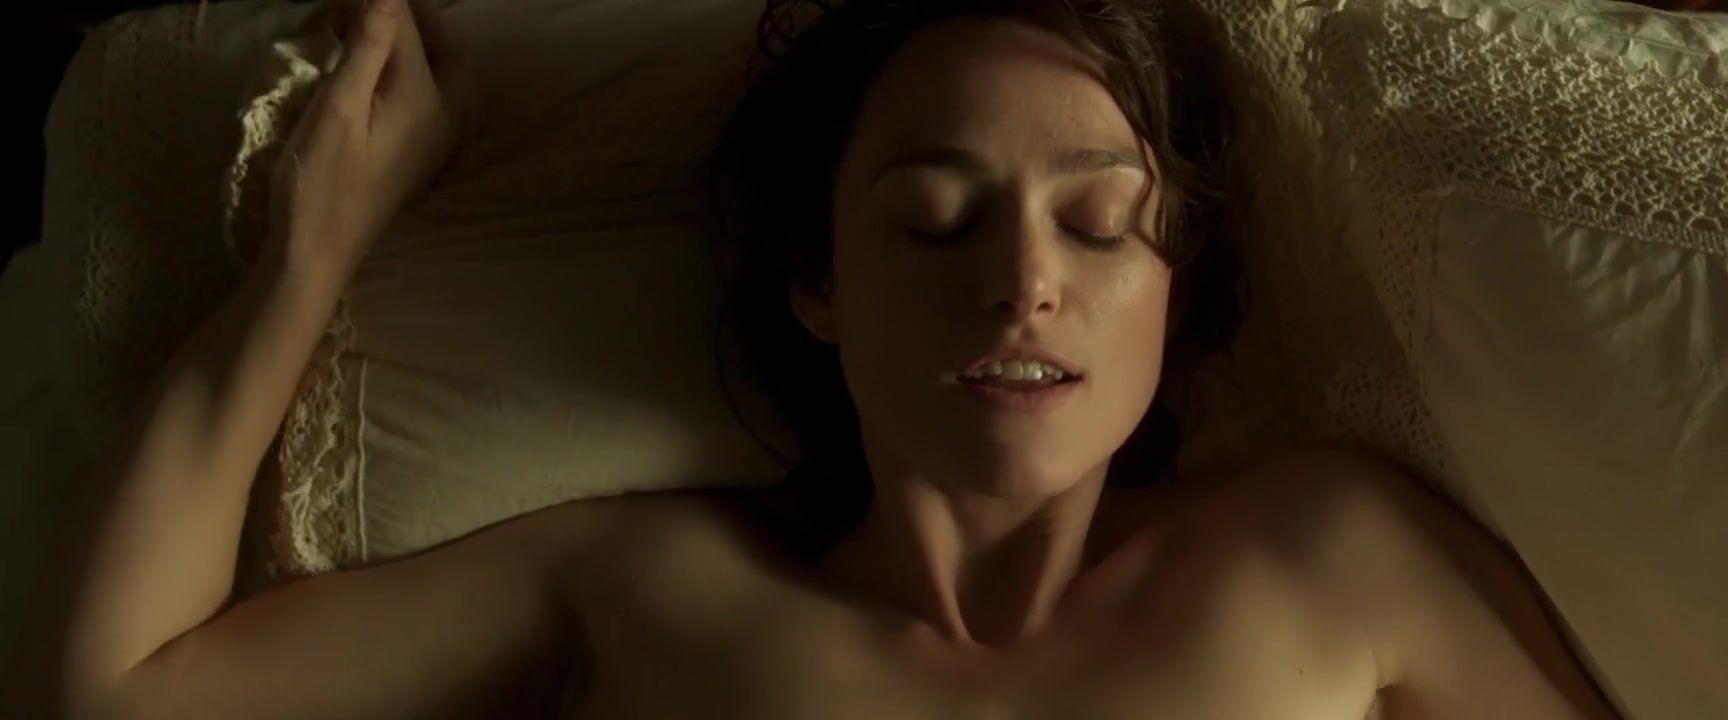 Perra Lesbian sex scenes of Keira Knightley and Eleanor Tomlinson from Colette (2018) Amatuer